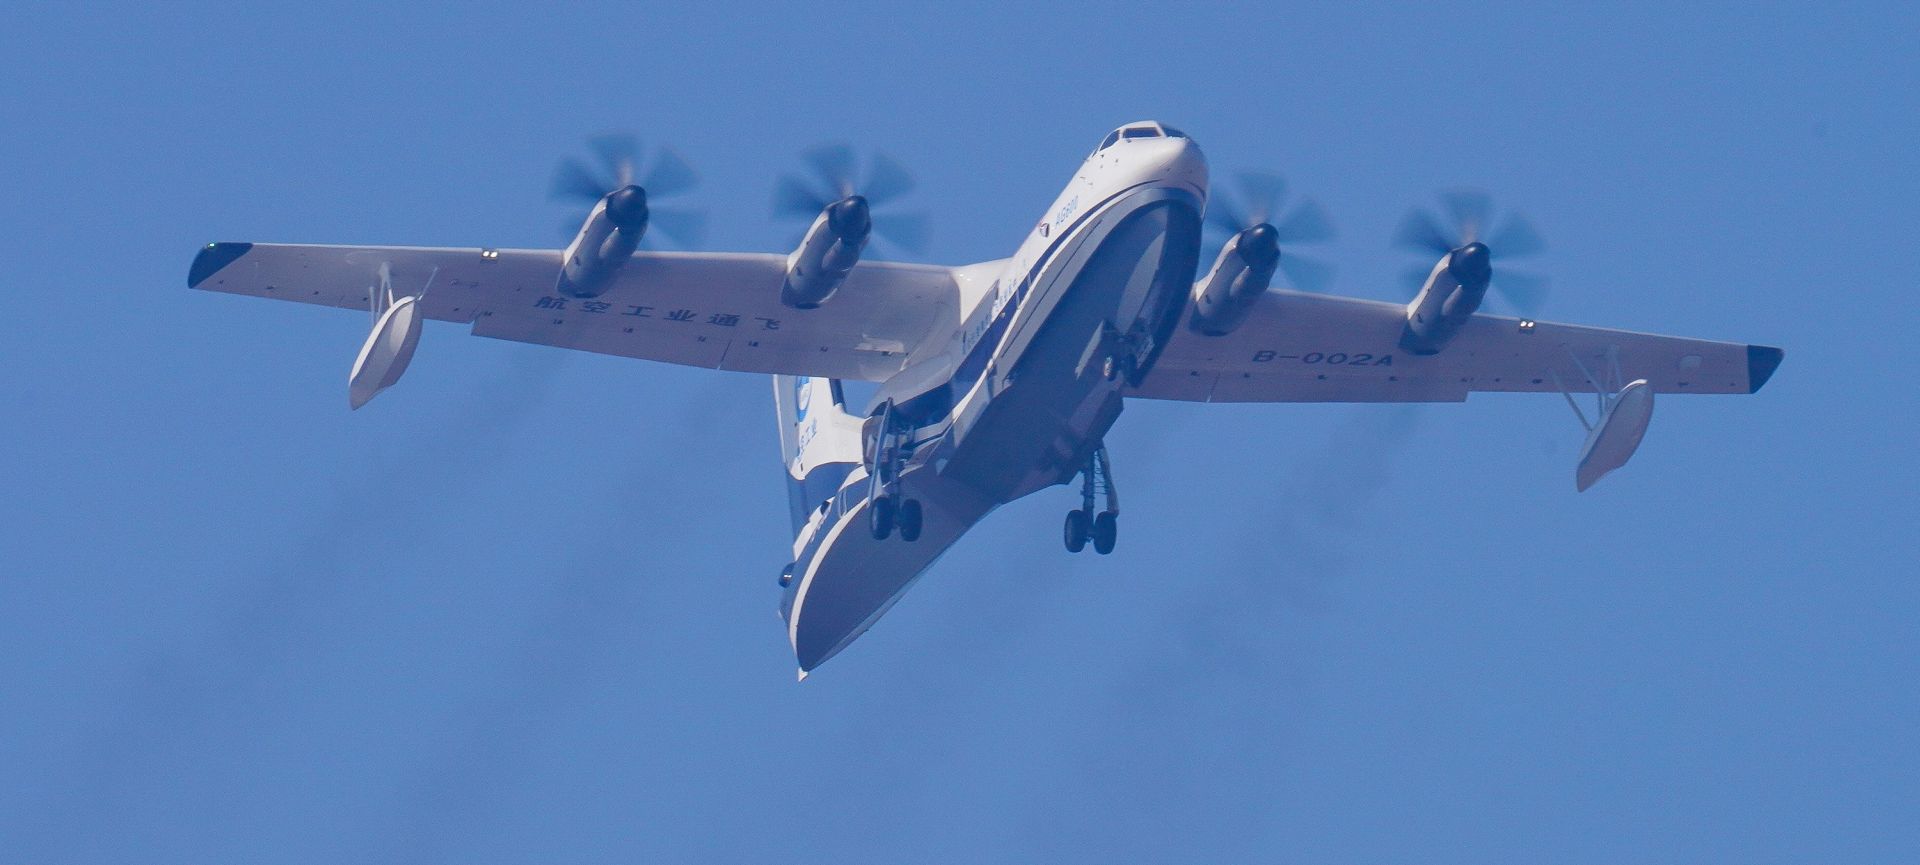 epa06404481 An AG600 amphibious aircraft takes off for its first test flight in Zhuhai, Guangdong province, China, 24 December 2017. The large amphibious flying boat, also known as TA-600, designed and built in China by the Aviation Industry Corporation of China (AVIC), is capable of aerial firefighting by dropping 12 tons of water and of search and rescue operations for 50 passengers.  EPA/KALY SILVA CHINA OUT